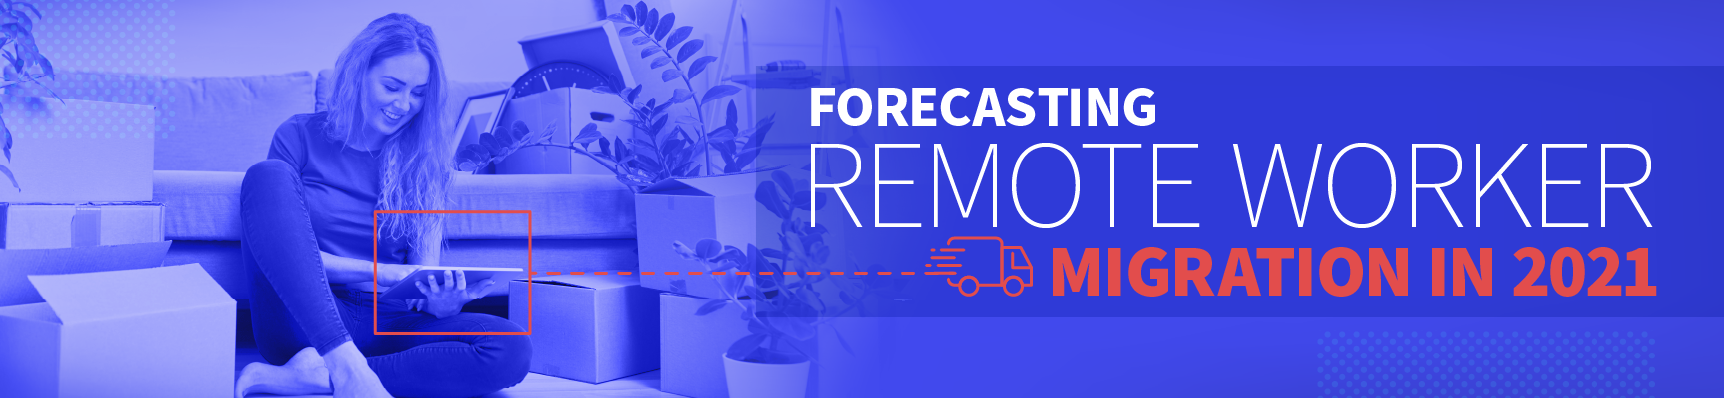 Forecasting Remote Worker Migration In 2021